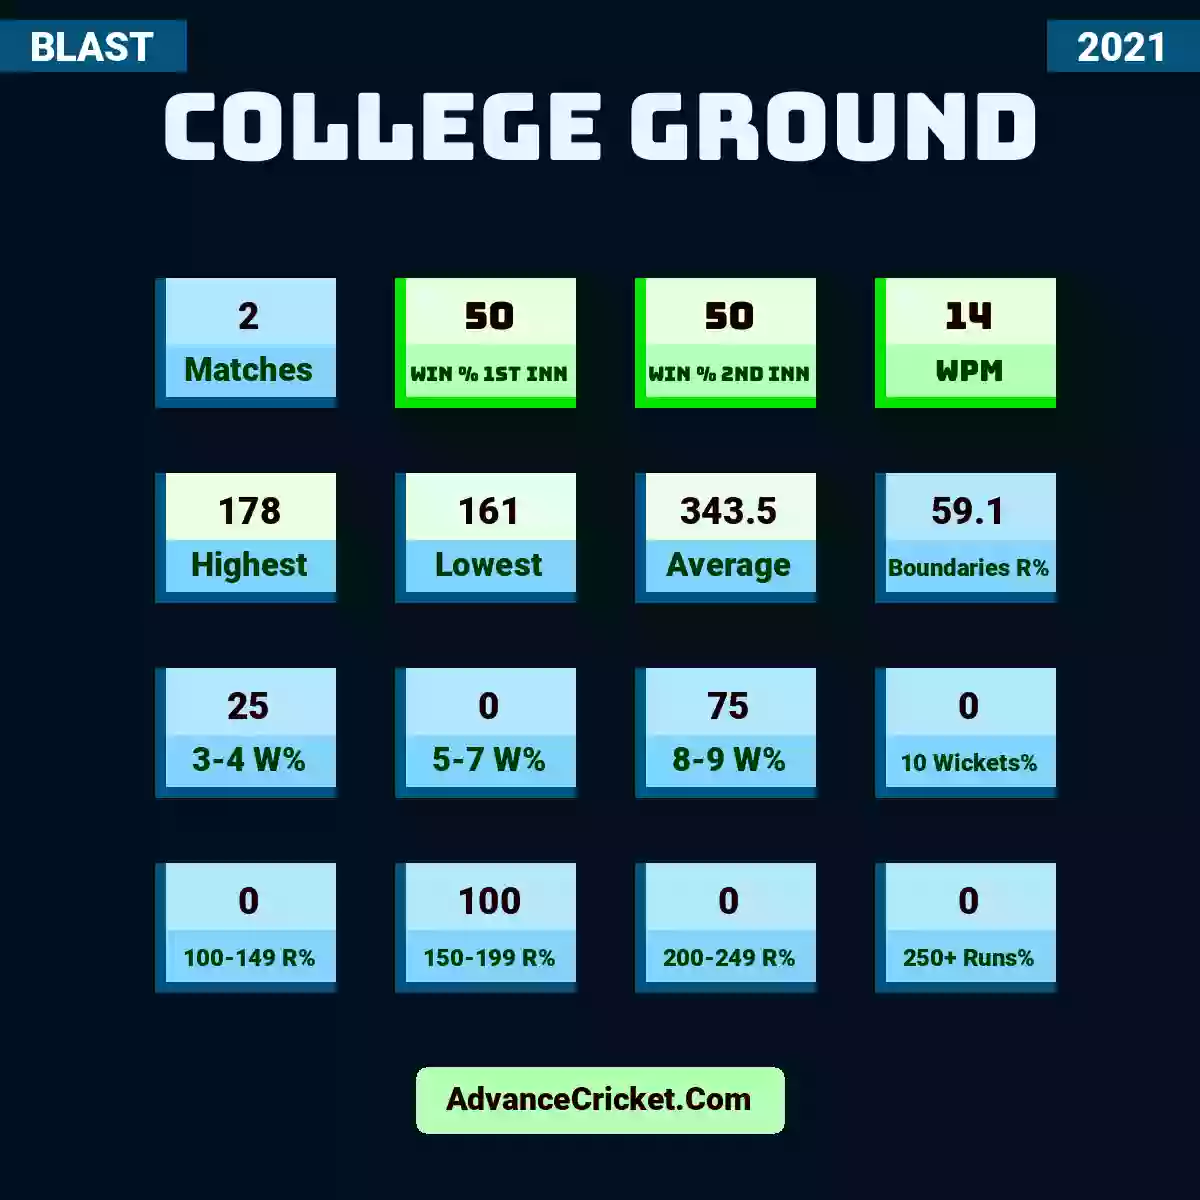 Image showing College Ground with Matches: 2, Win % 1st Inn: 50, Win % 2nd Inn: 50, WPM: 14, Highest: 178, Lowest: 161, Average: 343.5, Boundaries R%: 59.1, 3-4 W%: 25, 5-7 W%: 0, 8-9 W%: 75, 10 Wickets%: 0, 100-149 R%: 0, 150-199 R%: 100, 200-249 R%: 0, 250+ Runs%: 0.